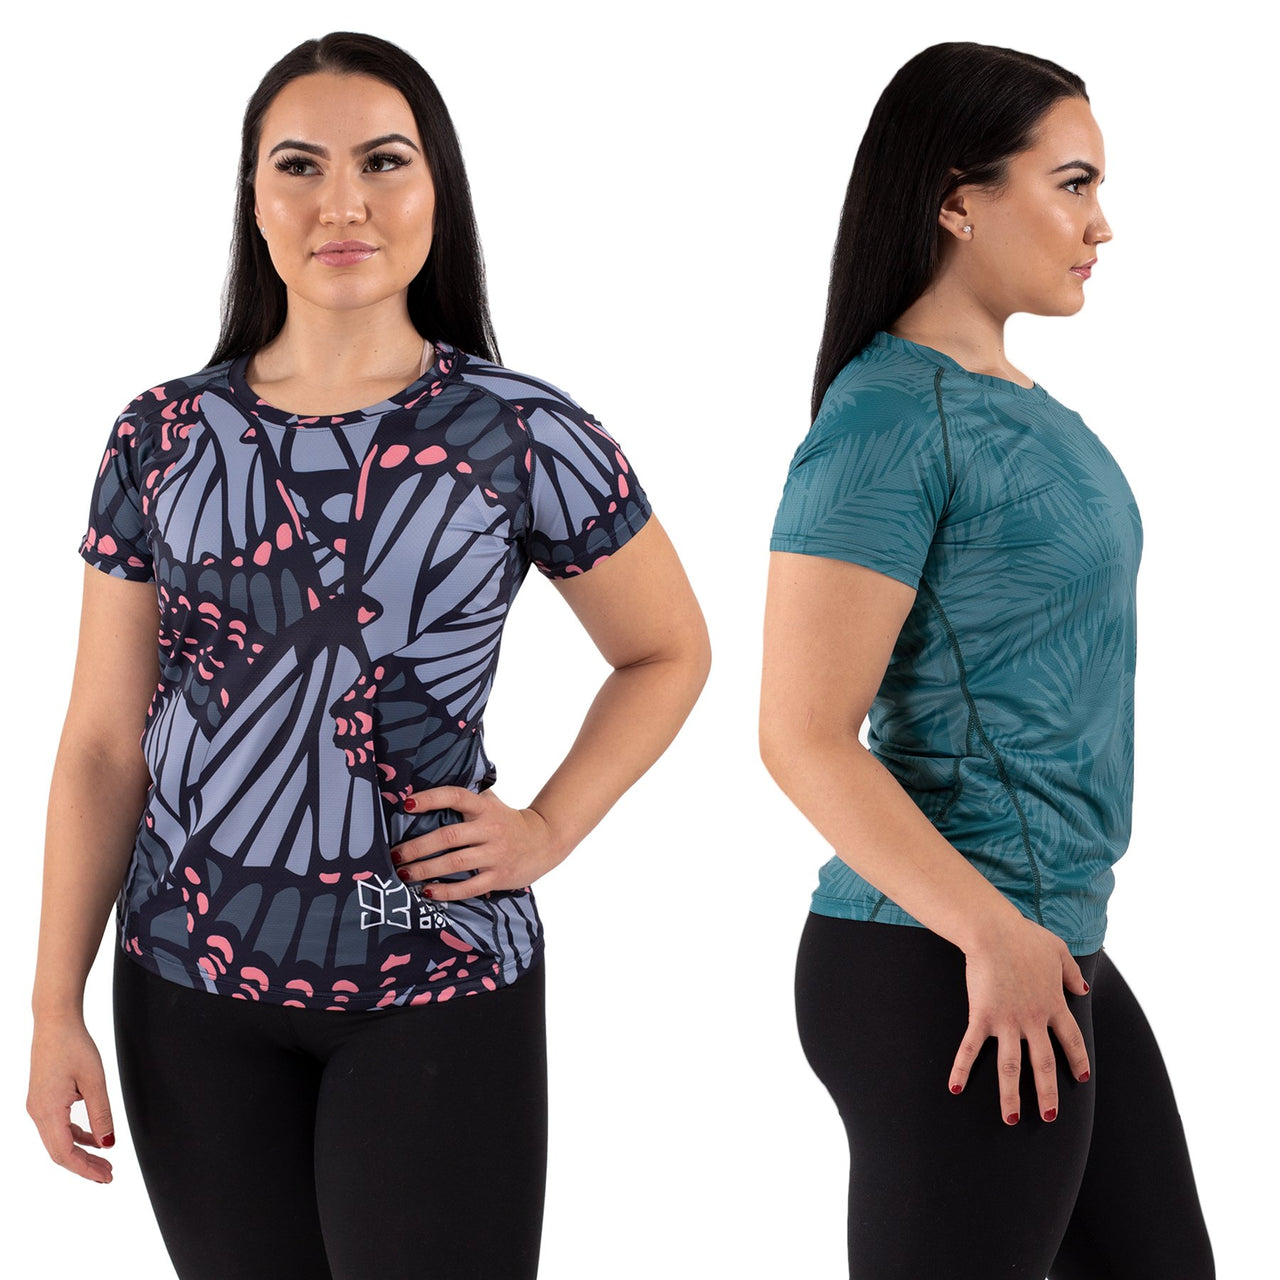 93brand Women's Dry Fit 2-PACK - Palm/Butterfly